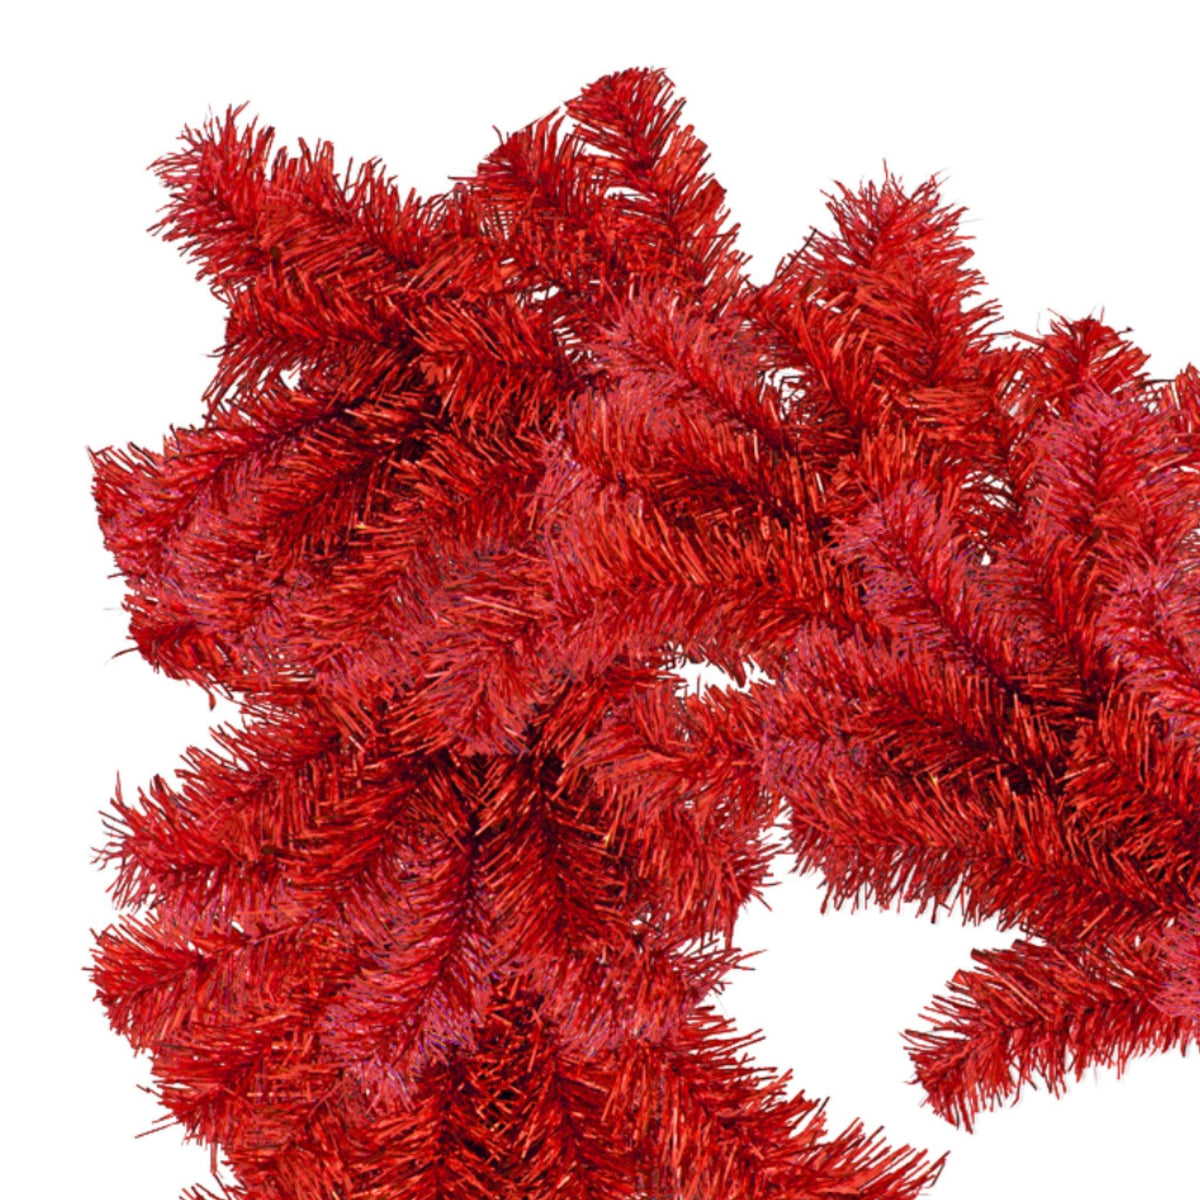 Shop for Lee Display's brand new 6FT Shiny Metallic Red Tinsel Brush Garlands on sale now at leedisplay.com.  Middle